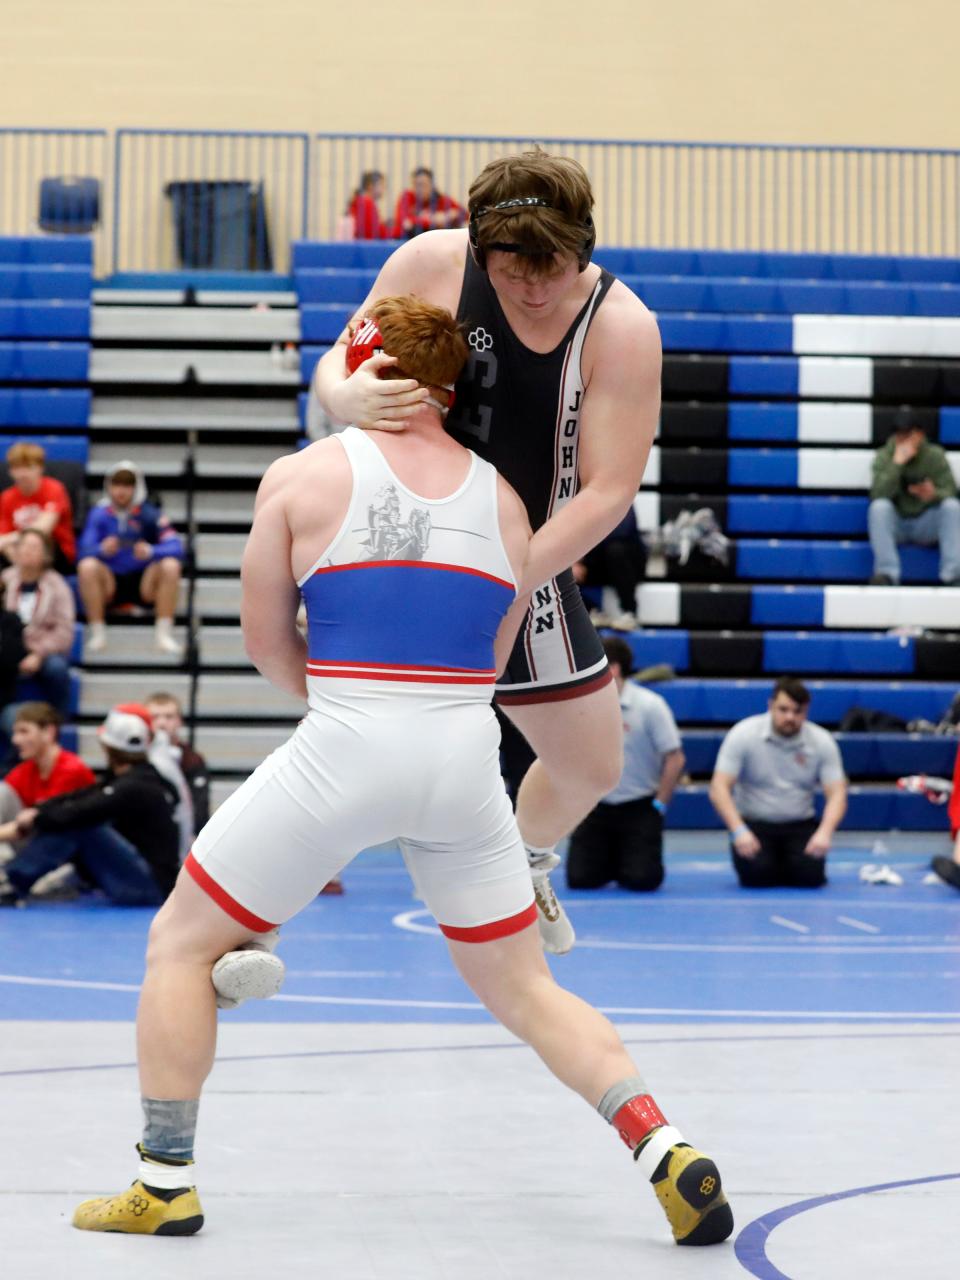 John Glenn sophomore Kian Barton wrestles West Holmes' Grant Miller, left, in the third-place match at 215 pounds during the Division II district wrestling tournament on Saturday at Gallia Academy High School in Gallipolis. Barton was one of four Muskies to qualify for the state tournament at Ohio State.